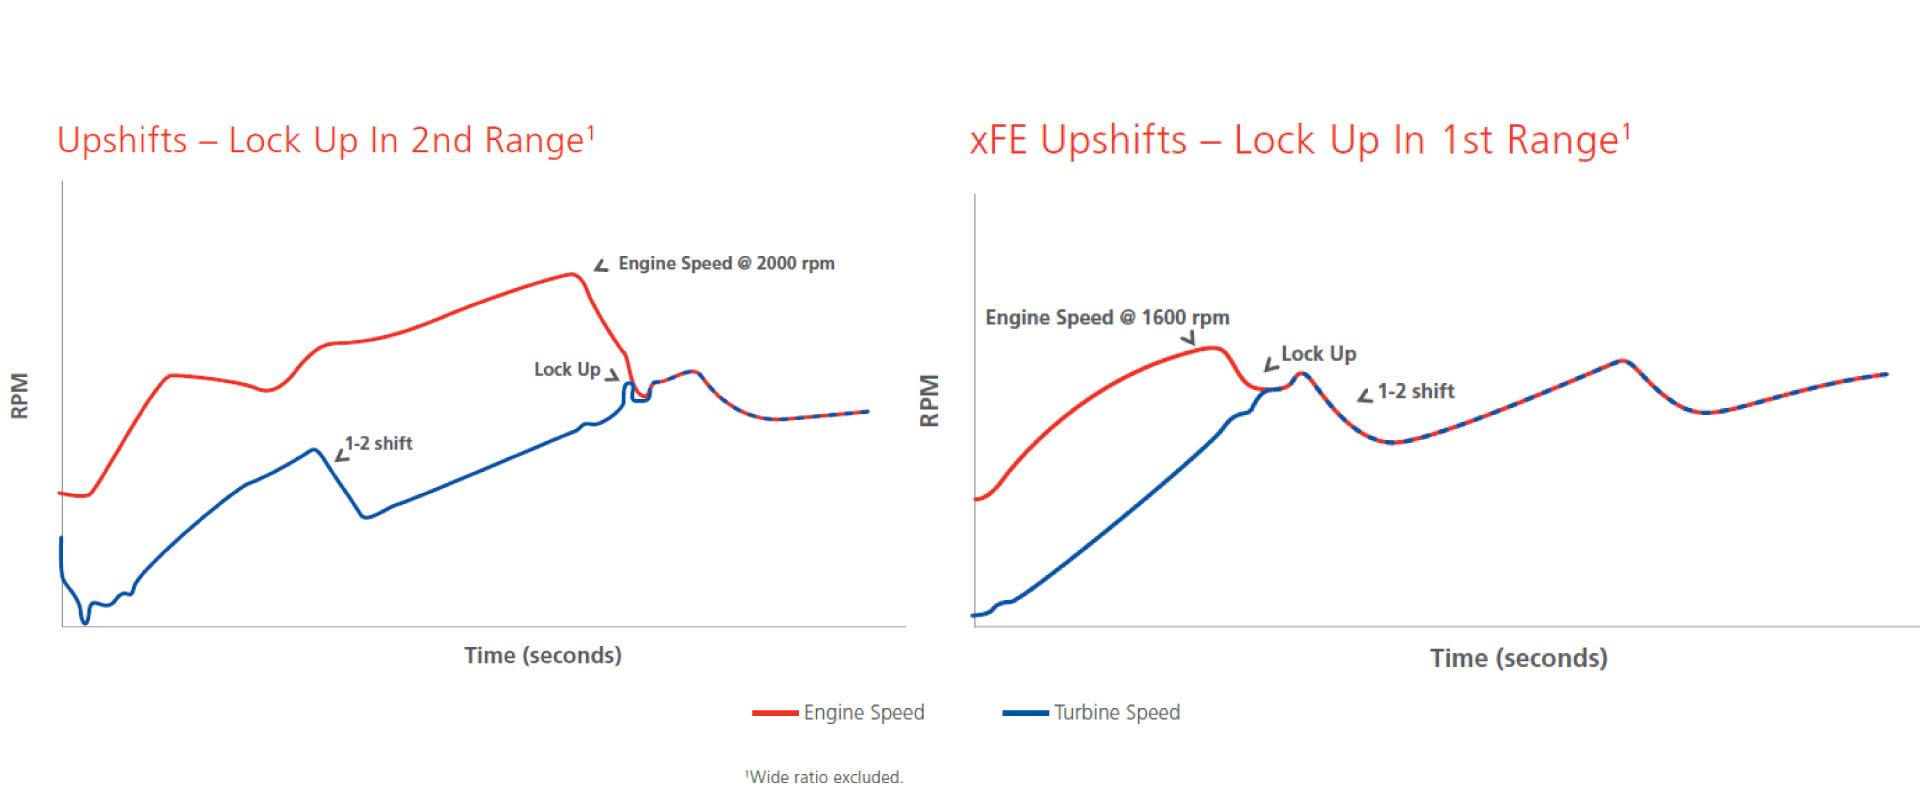 Two side-by-side graphs depicting upshifts and lock-up for vehicles with and without xFE technology.